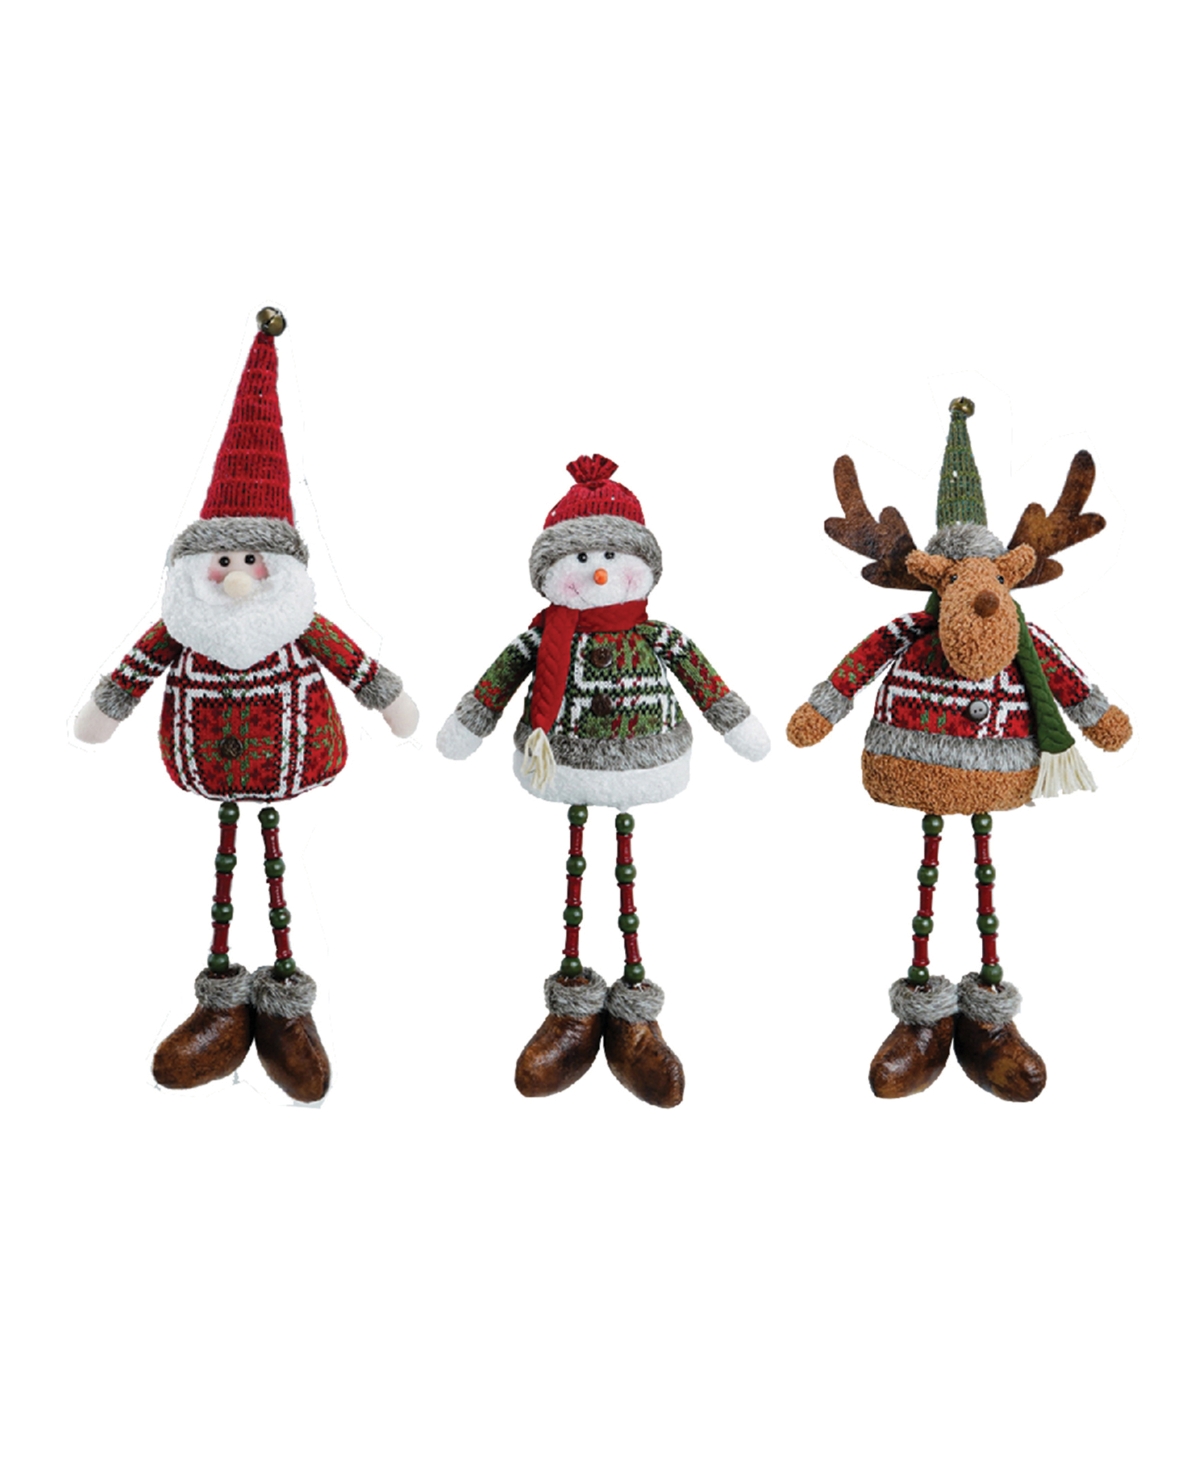 17.5" Xmas Time Sitters, Set of 3 - Red